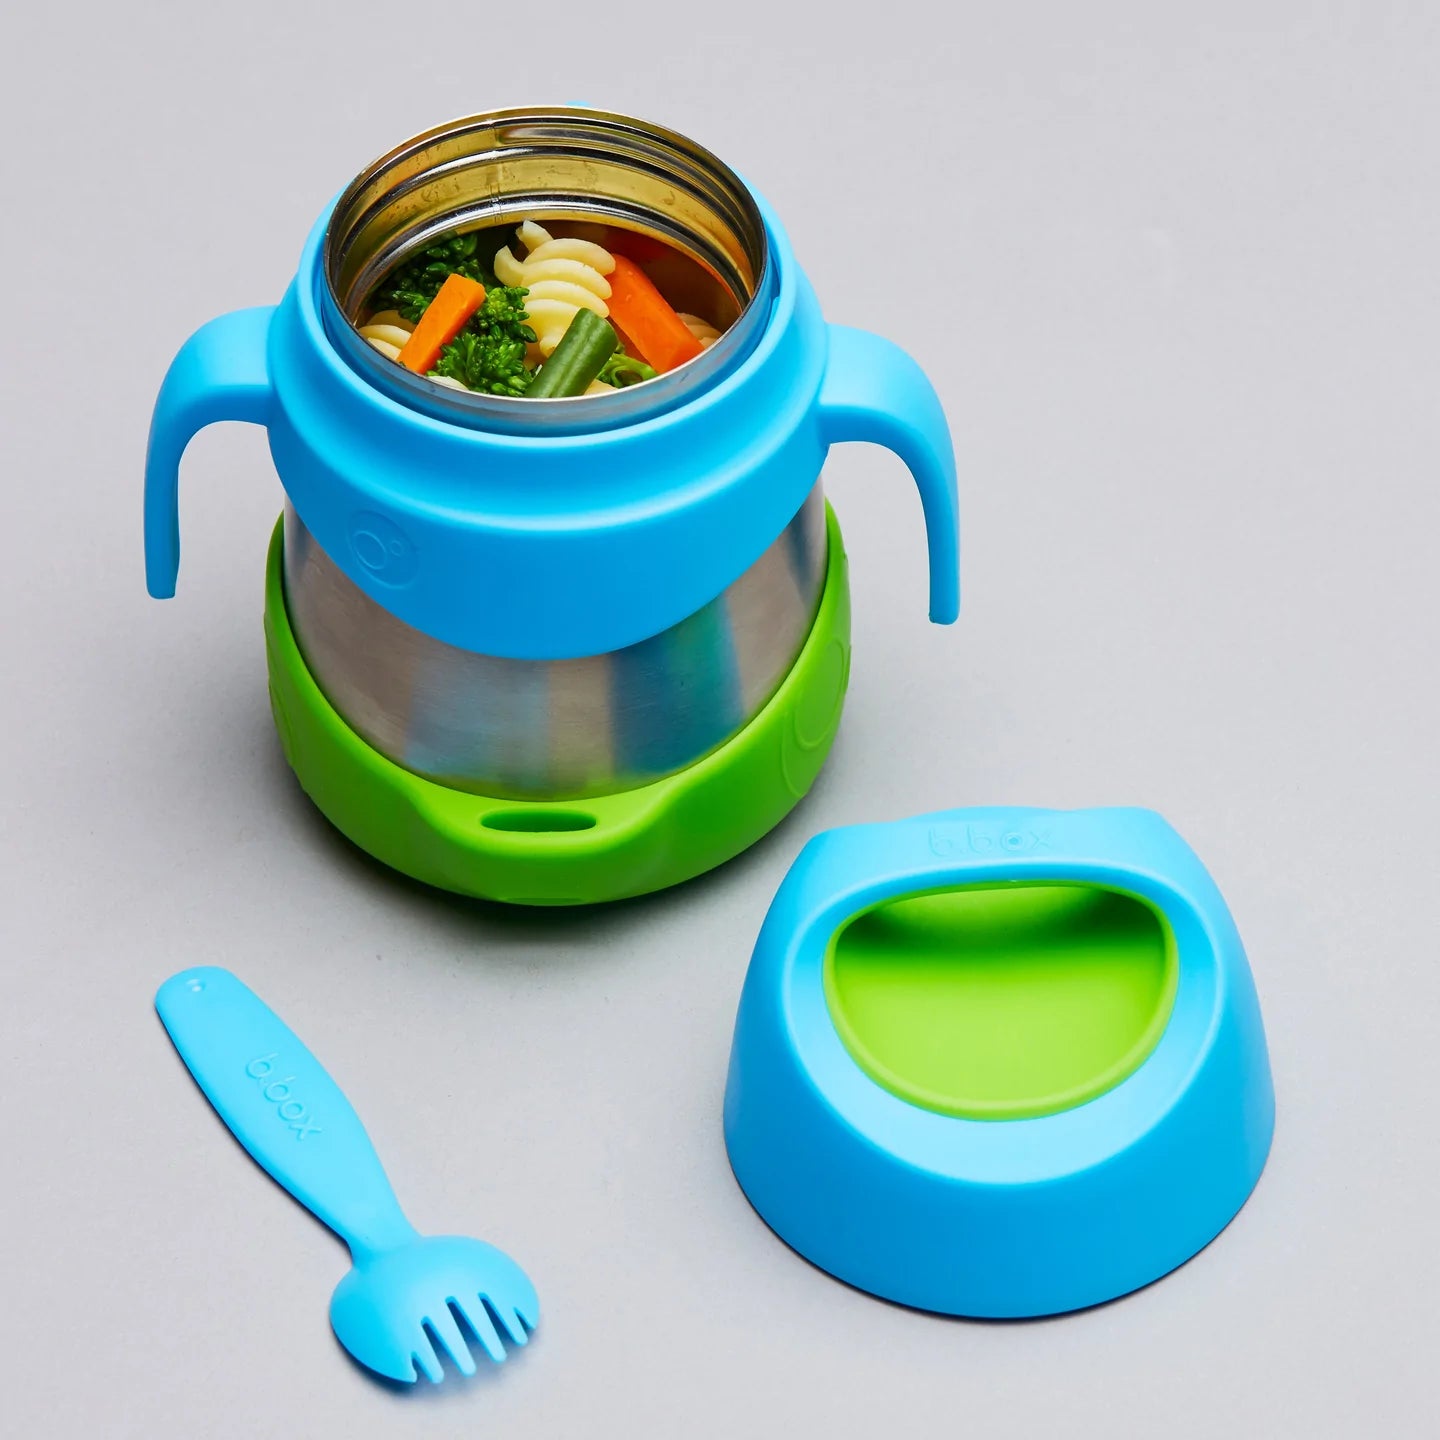 bbox insulated food jar - angus and dudley